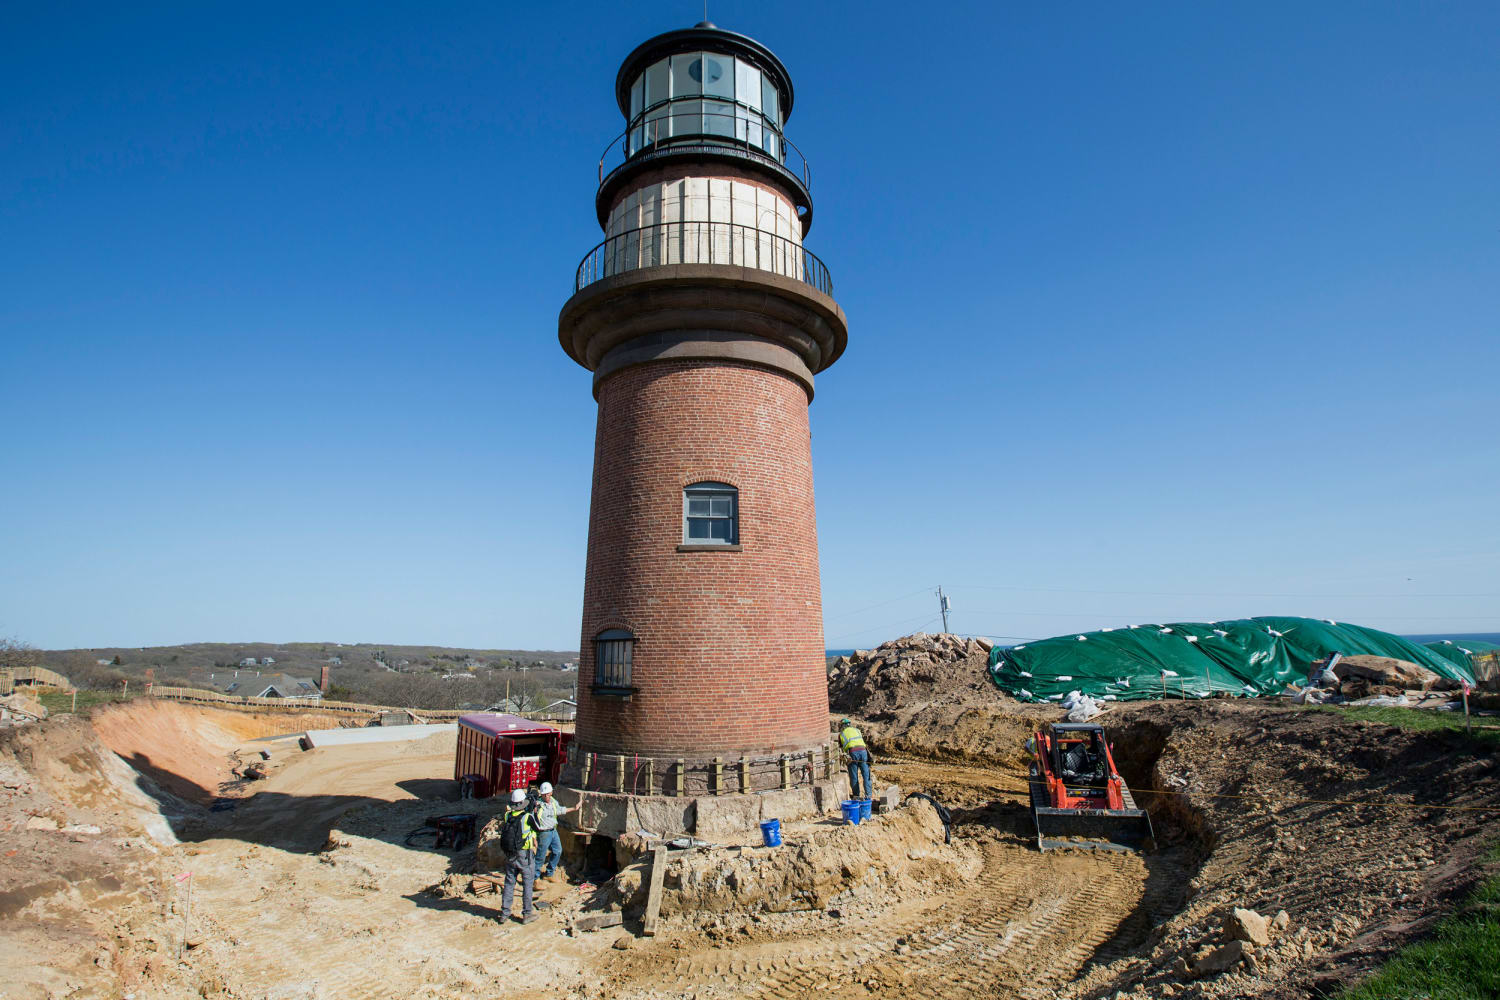 Aquinnah restaurant, iconic gay head property, goes on the market